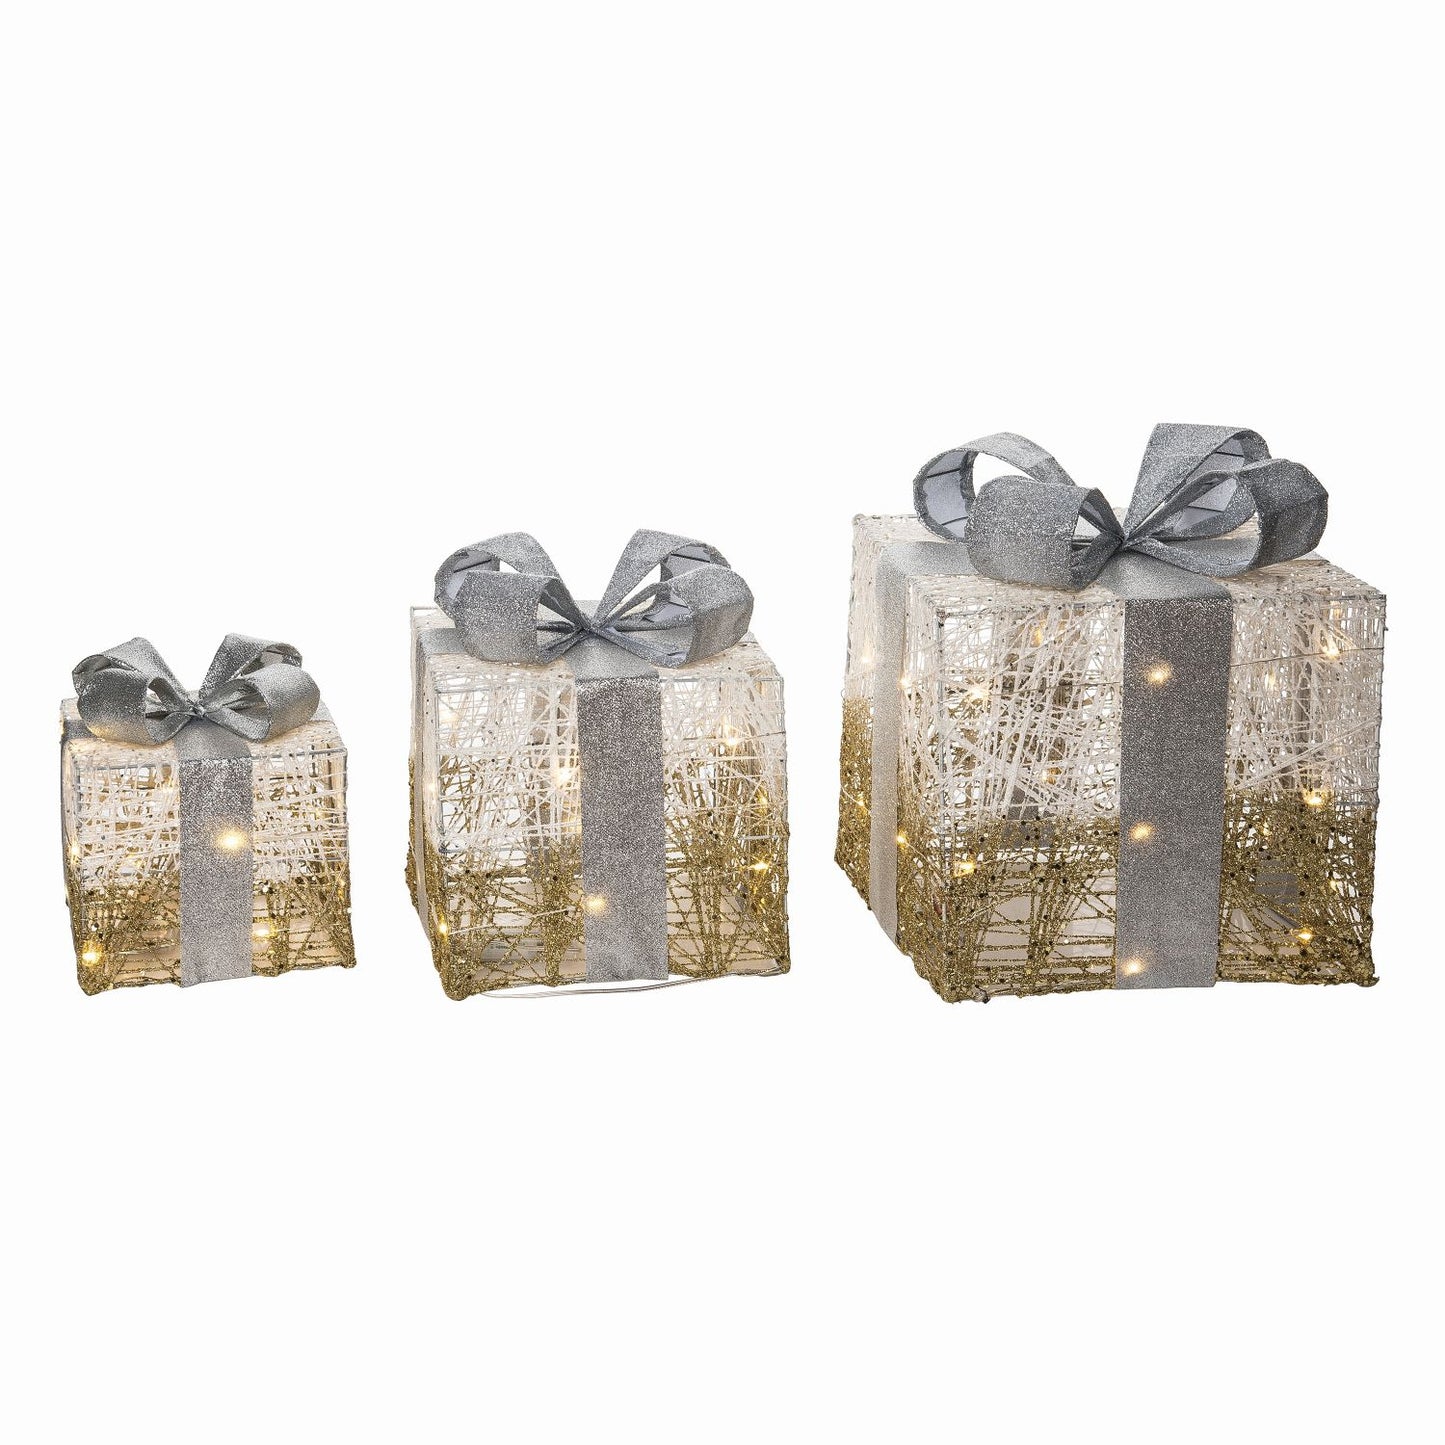 Transpac Metal Light Up Silver & Gold Gift Decor, Set Of 3